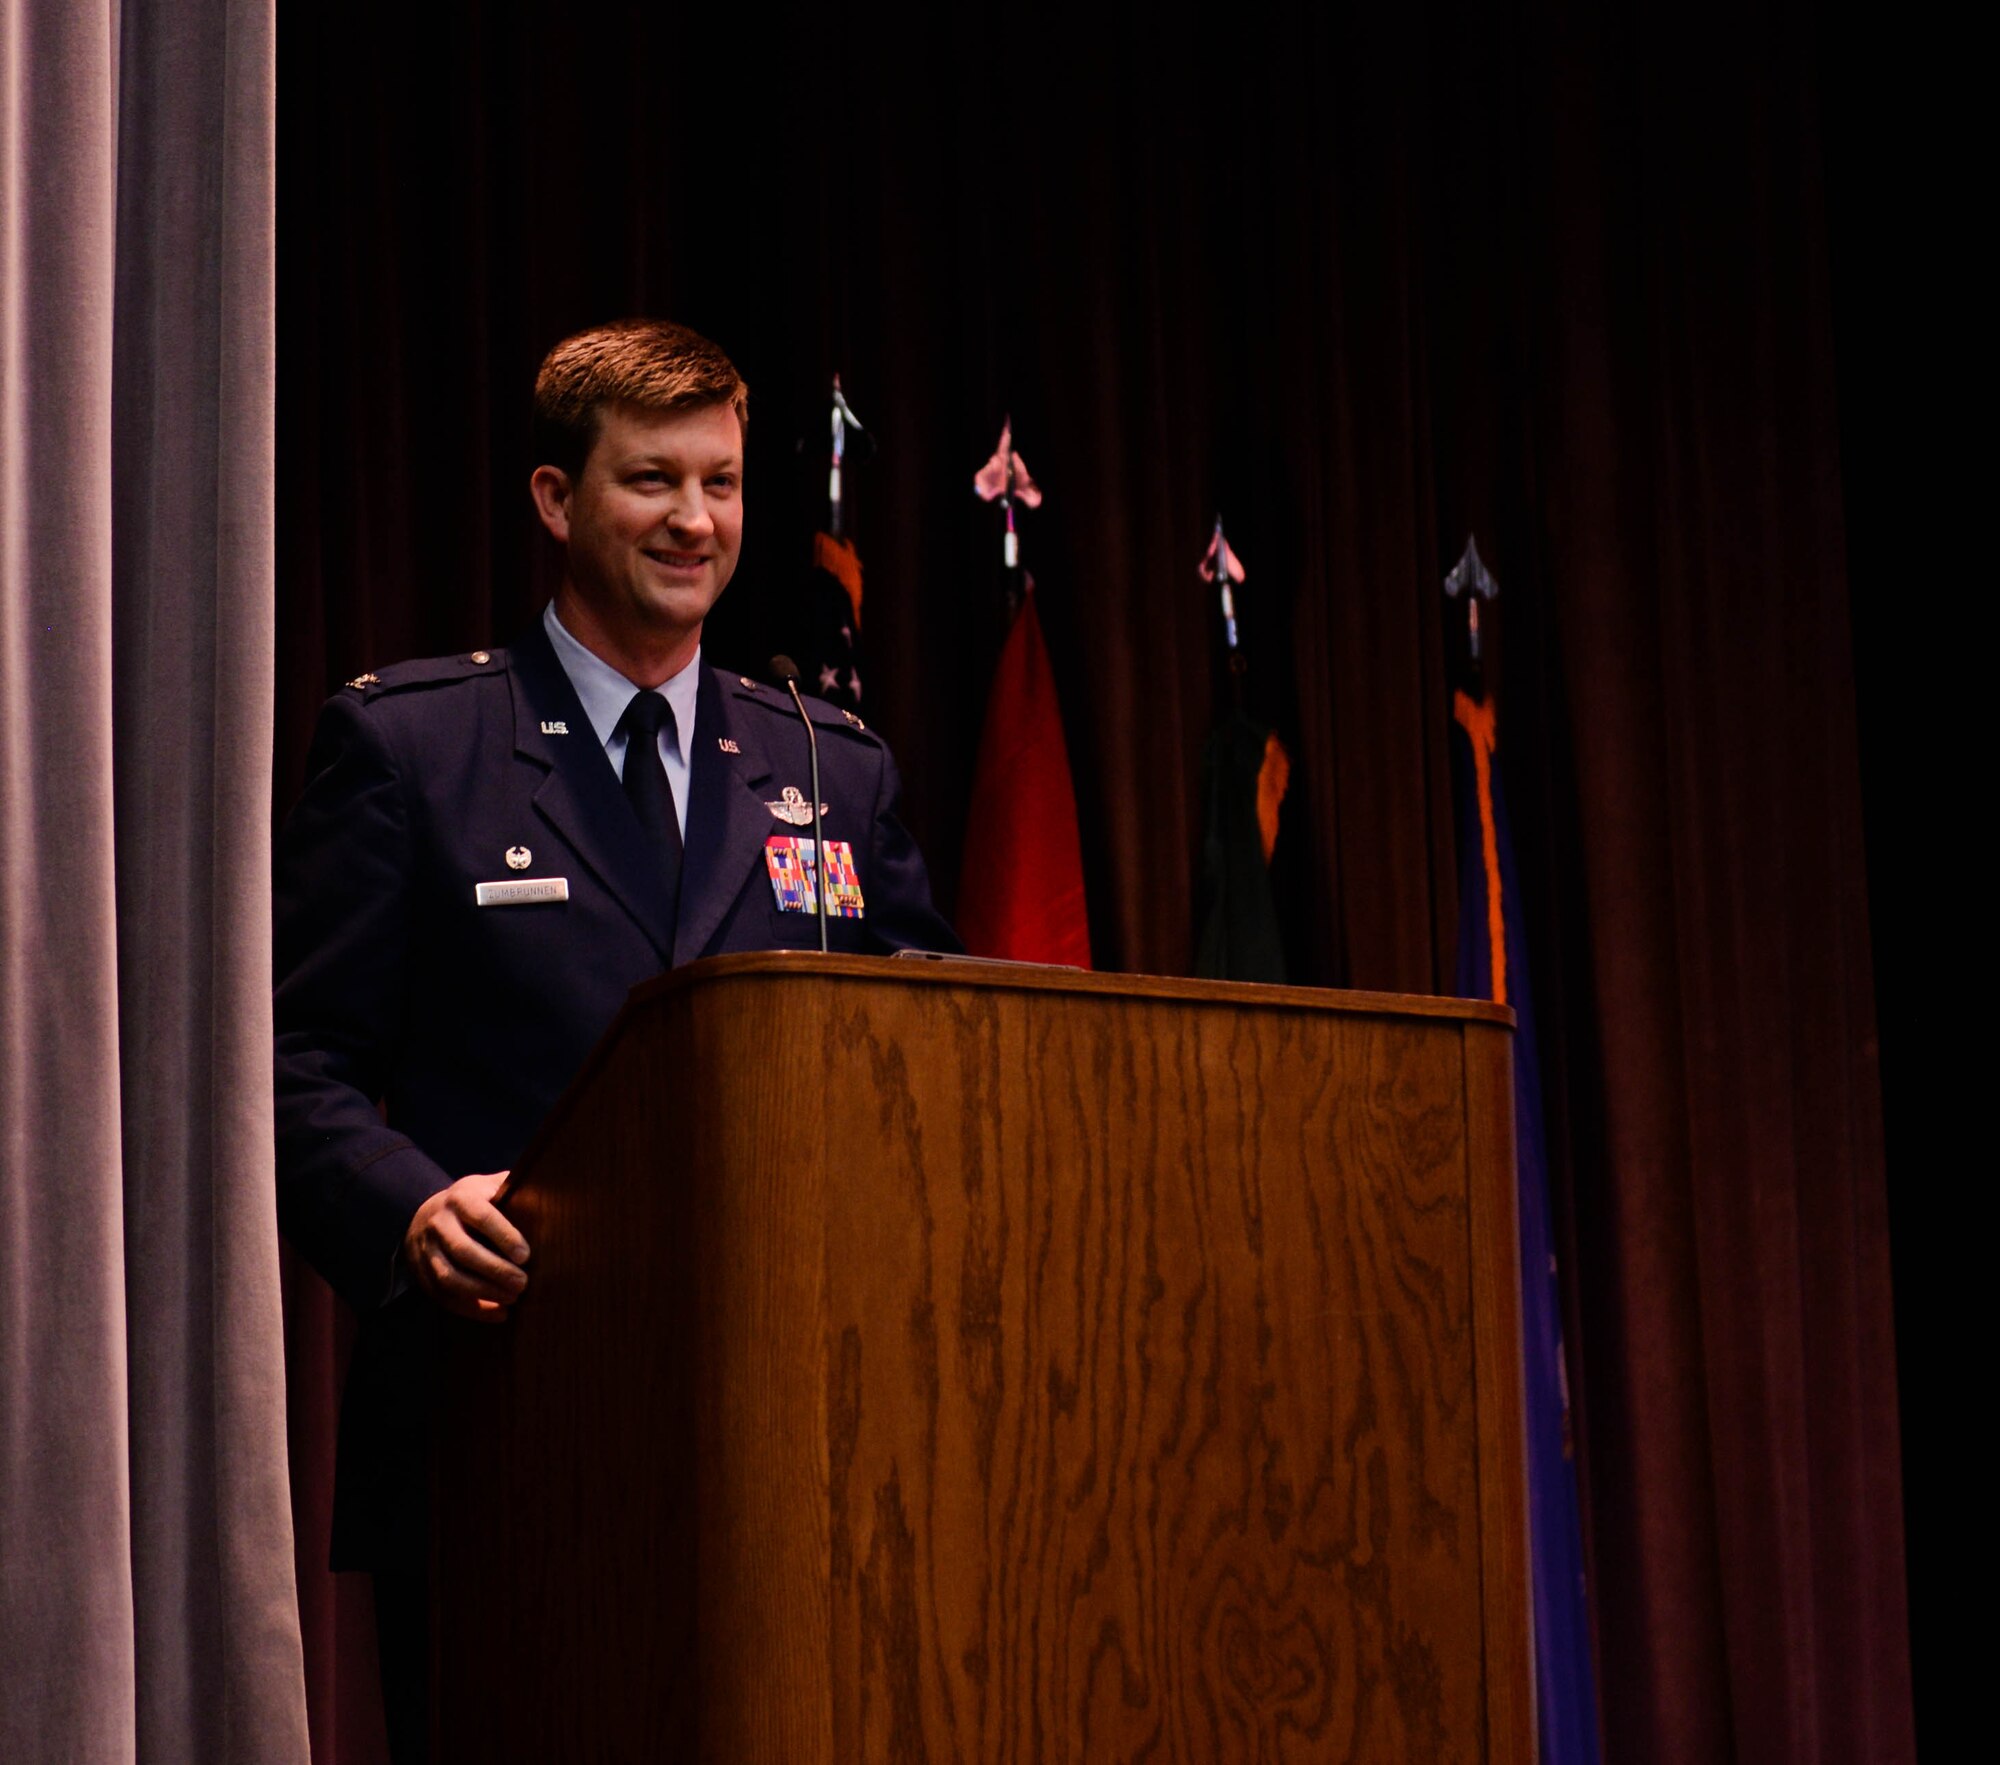 Col. Clinton ZumBrunnen, 437th Airlift Wing commander at Joint Base Charleston, South Carolina, gives a speech at the graduation ceremony of Specialized Undergraduate Pilot Training Class 20-03 Nov. 15, 2019, at Columbus Air Force Base, Miss. During his speech, he told the graduates a story about retired U.S. Army Staff Sgt. Dan Powers, a former squadron leader of the 118th Military Police Company, and how an aircrew’s skillful tactics helped save his life. (U.S. Air Force photo by Airman Davis Donaldson)